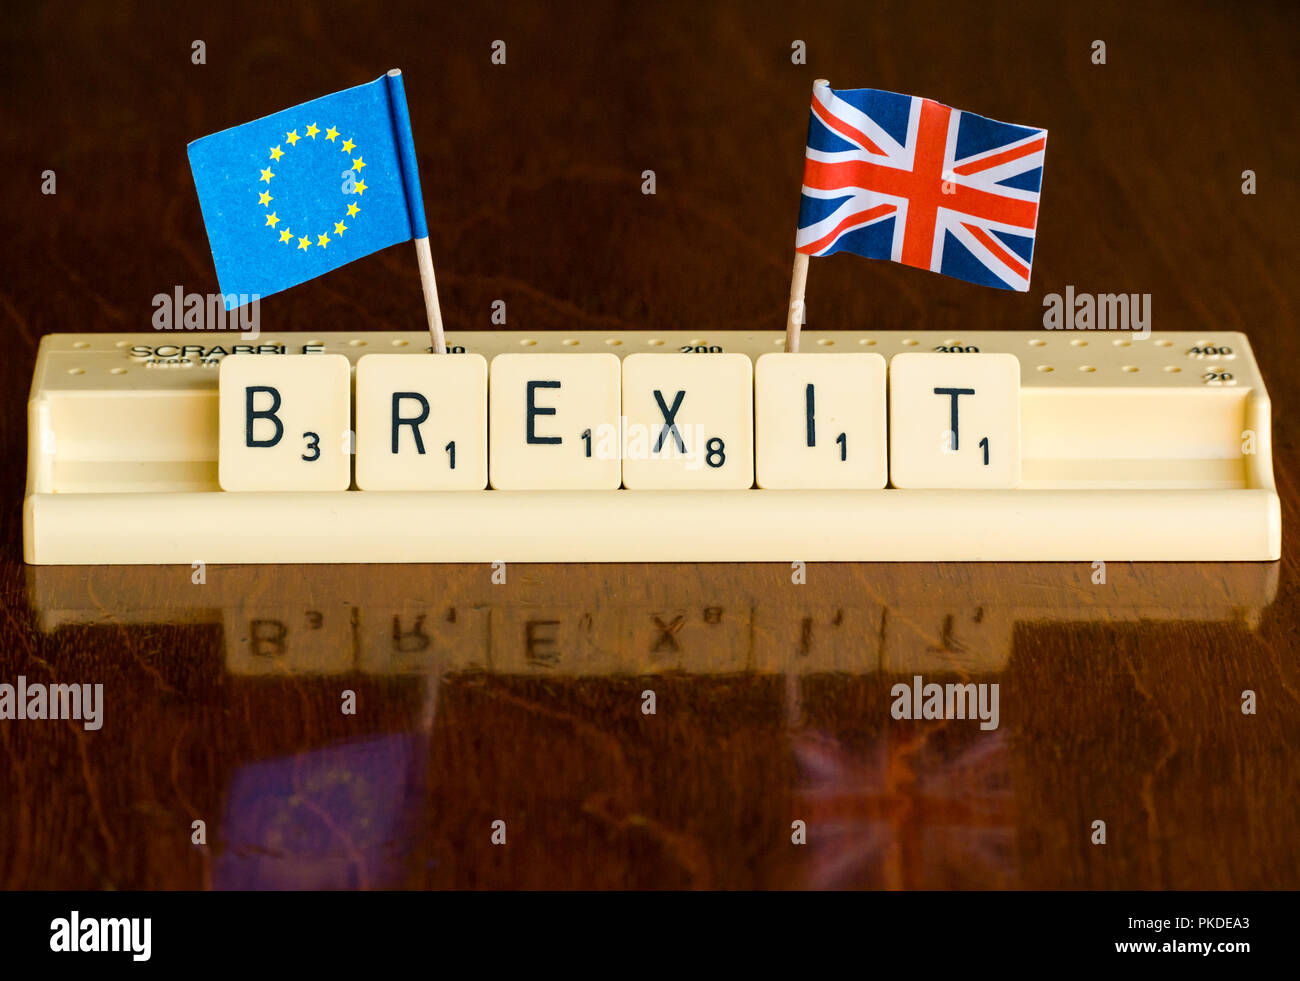 Scrabble letters spelling Brexit in Scrabble tray with British Union Jack and EU flags on dark mahogany background Stock Photo